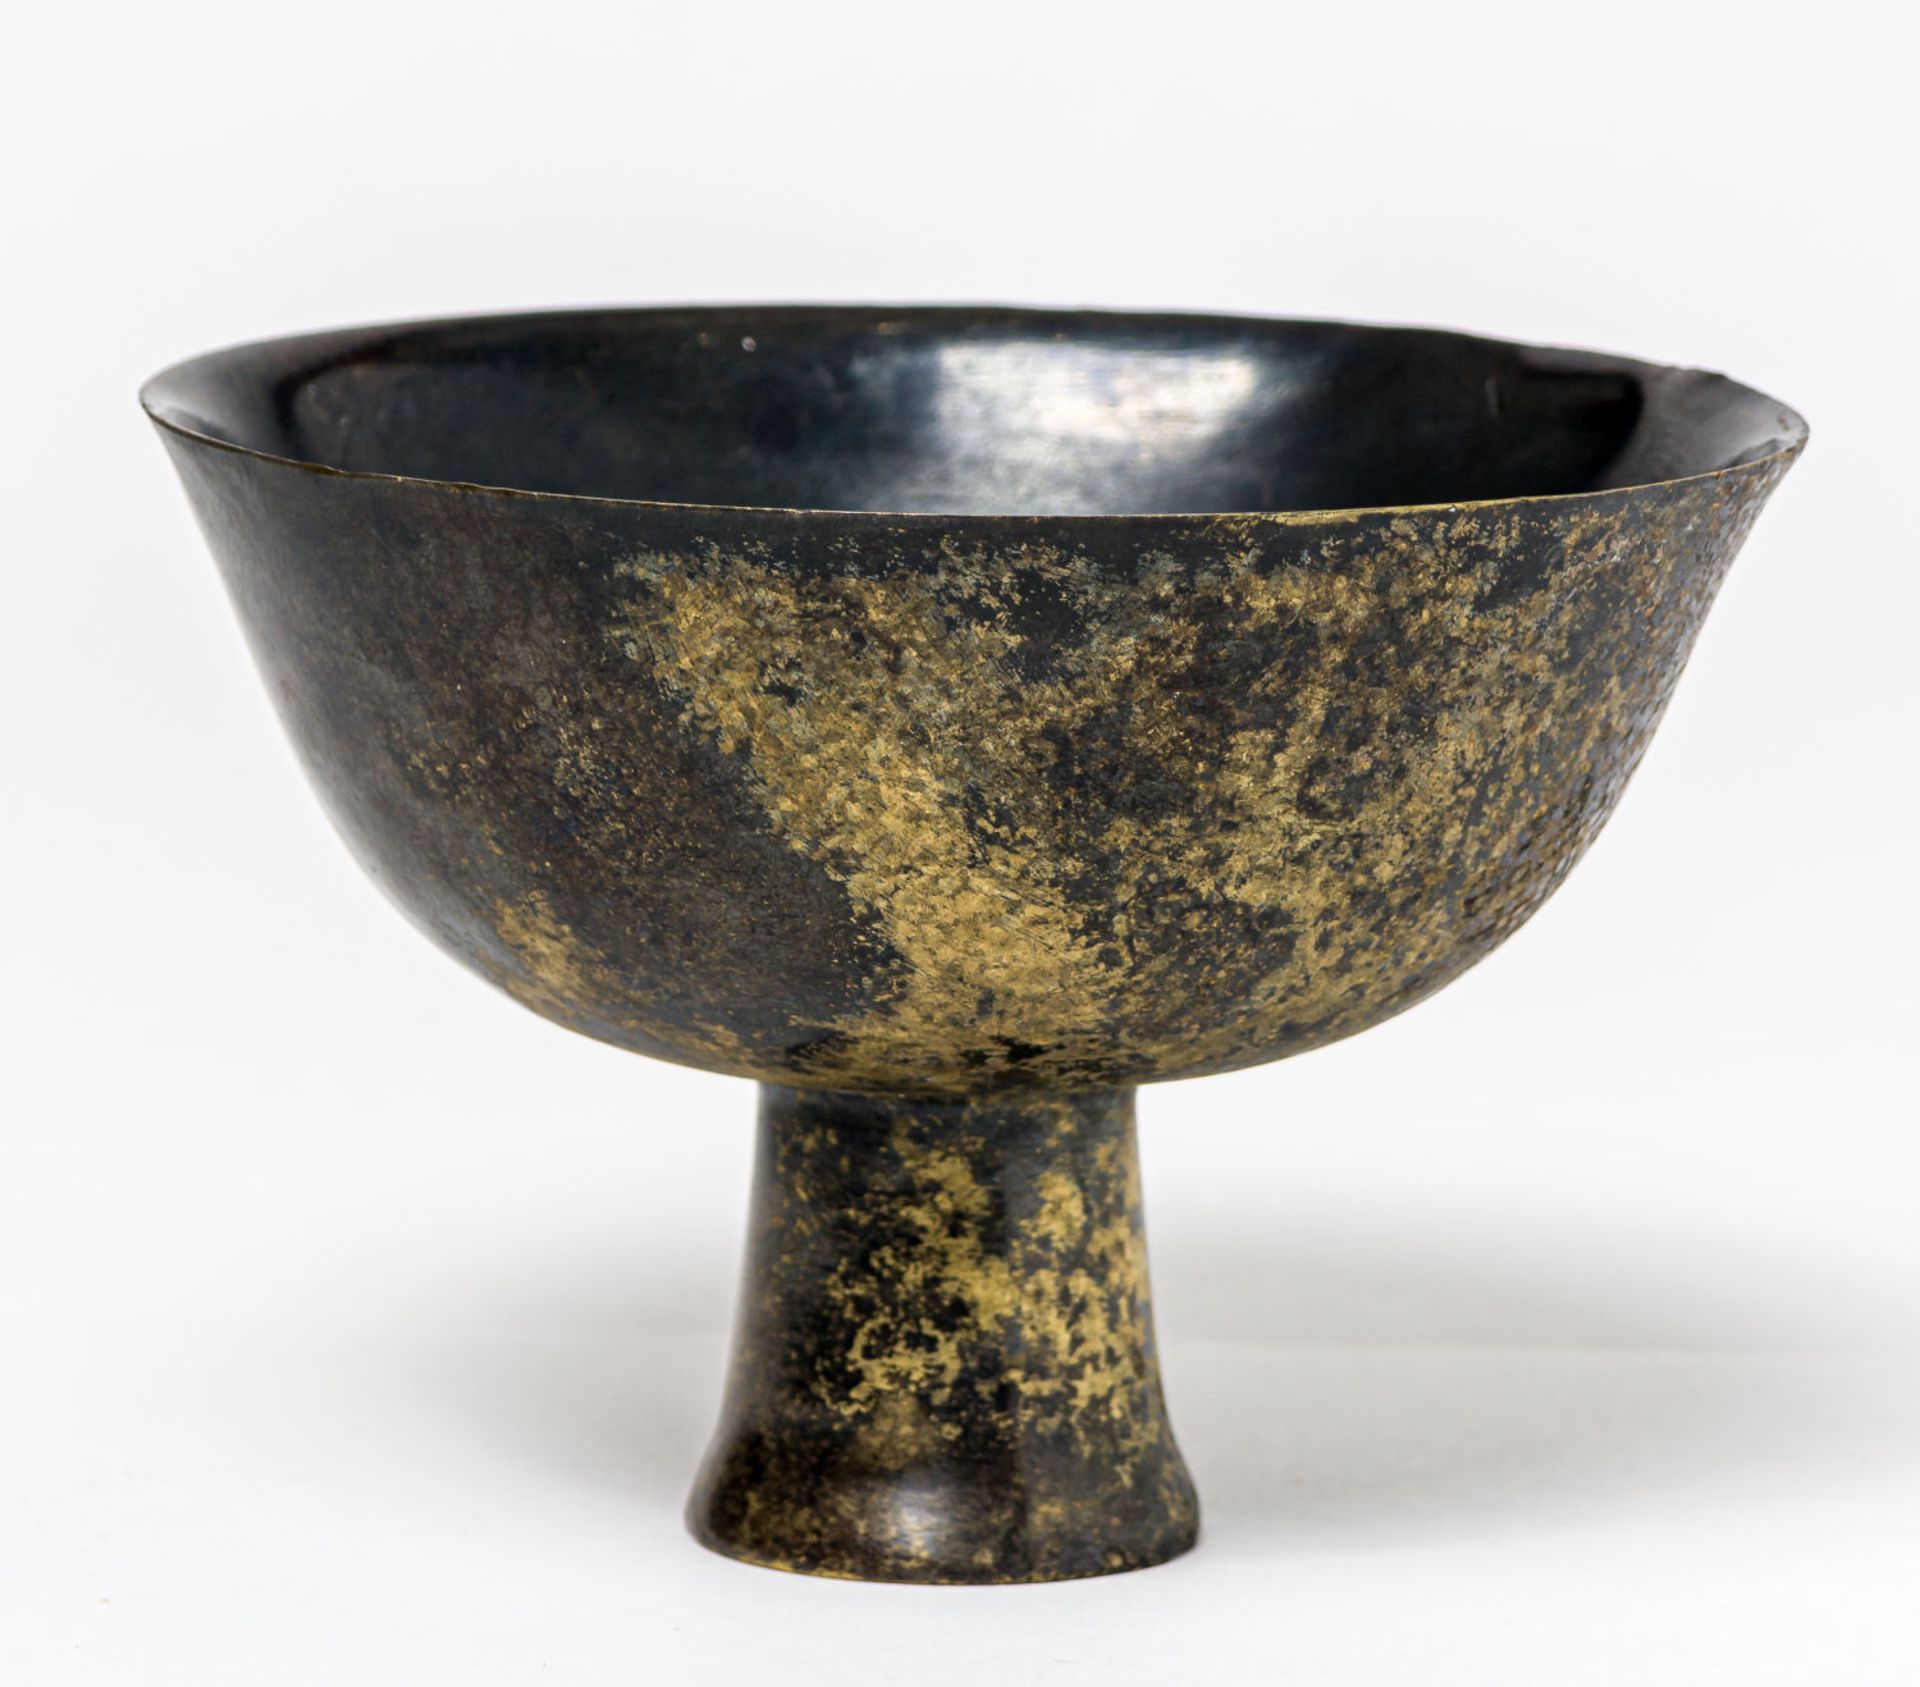 A CHINESE BRONZE (?) CUP OR SINGING BOWL